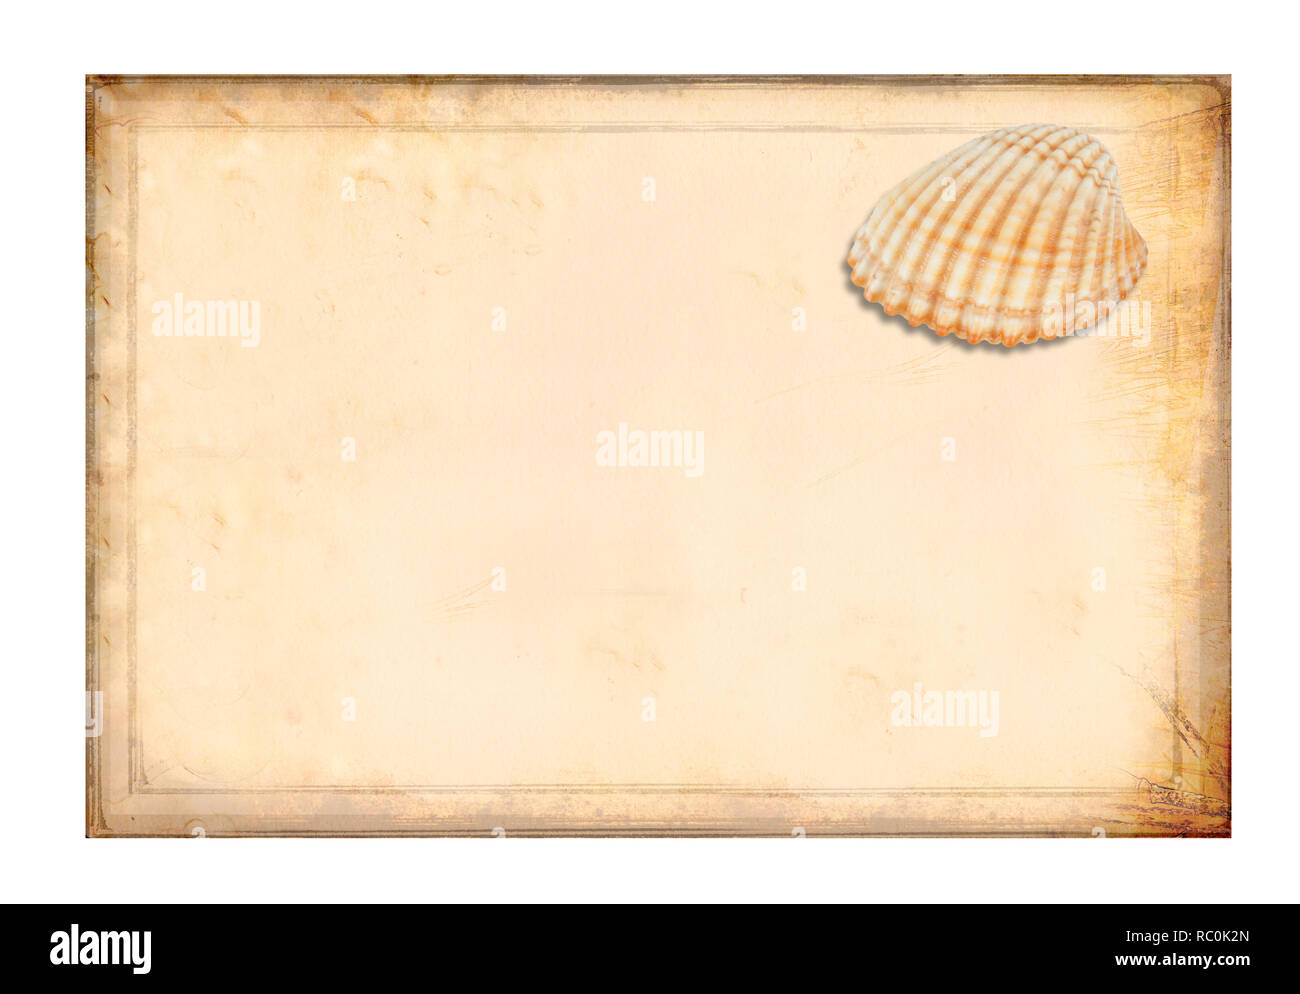 Antique yellowish parchment paper grungy background texture Stock Photo